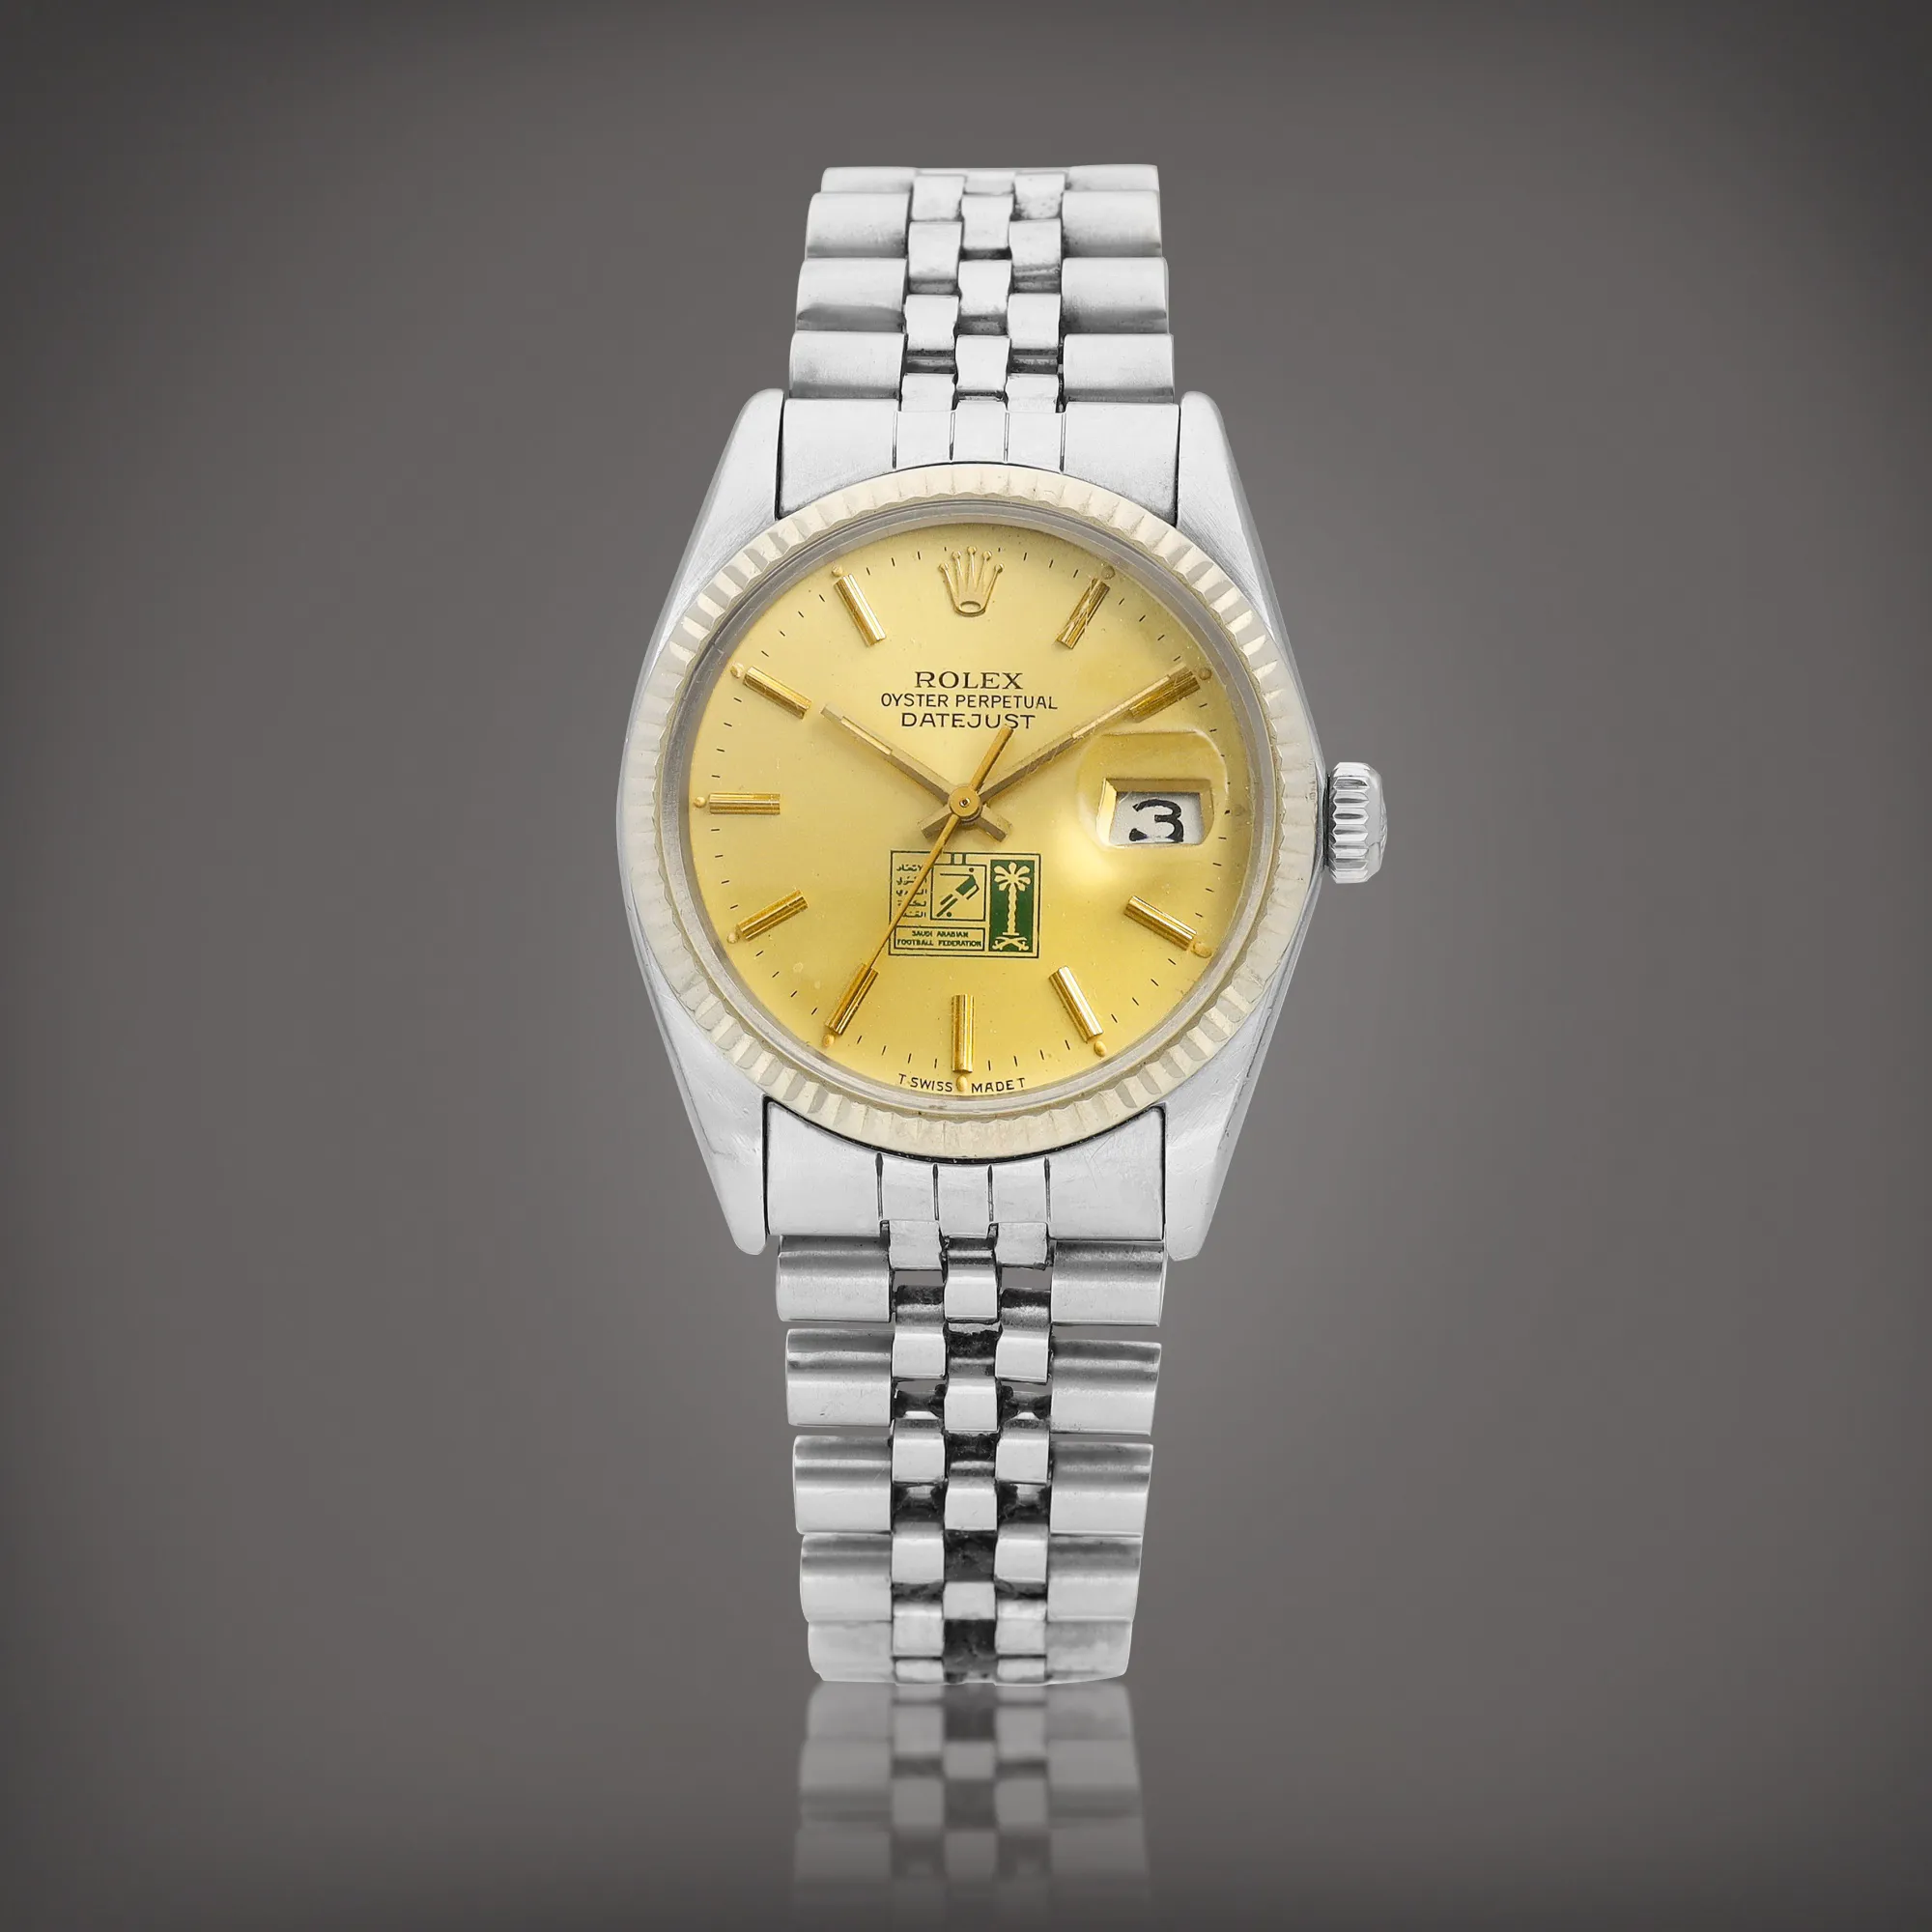 Rolex Datejust 36 16014 36mm Stainless steel Champagne